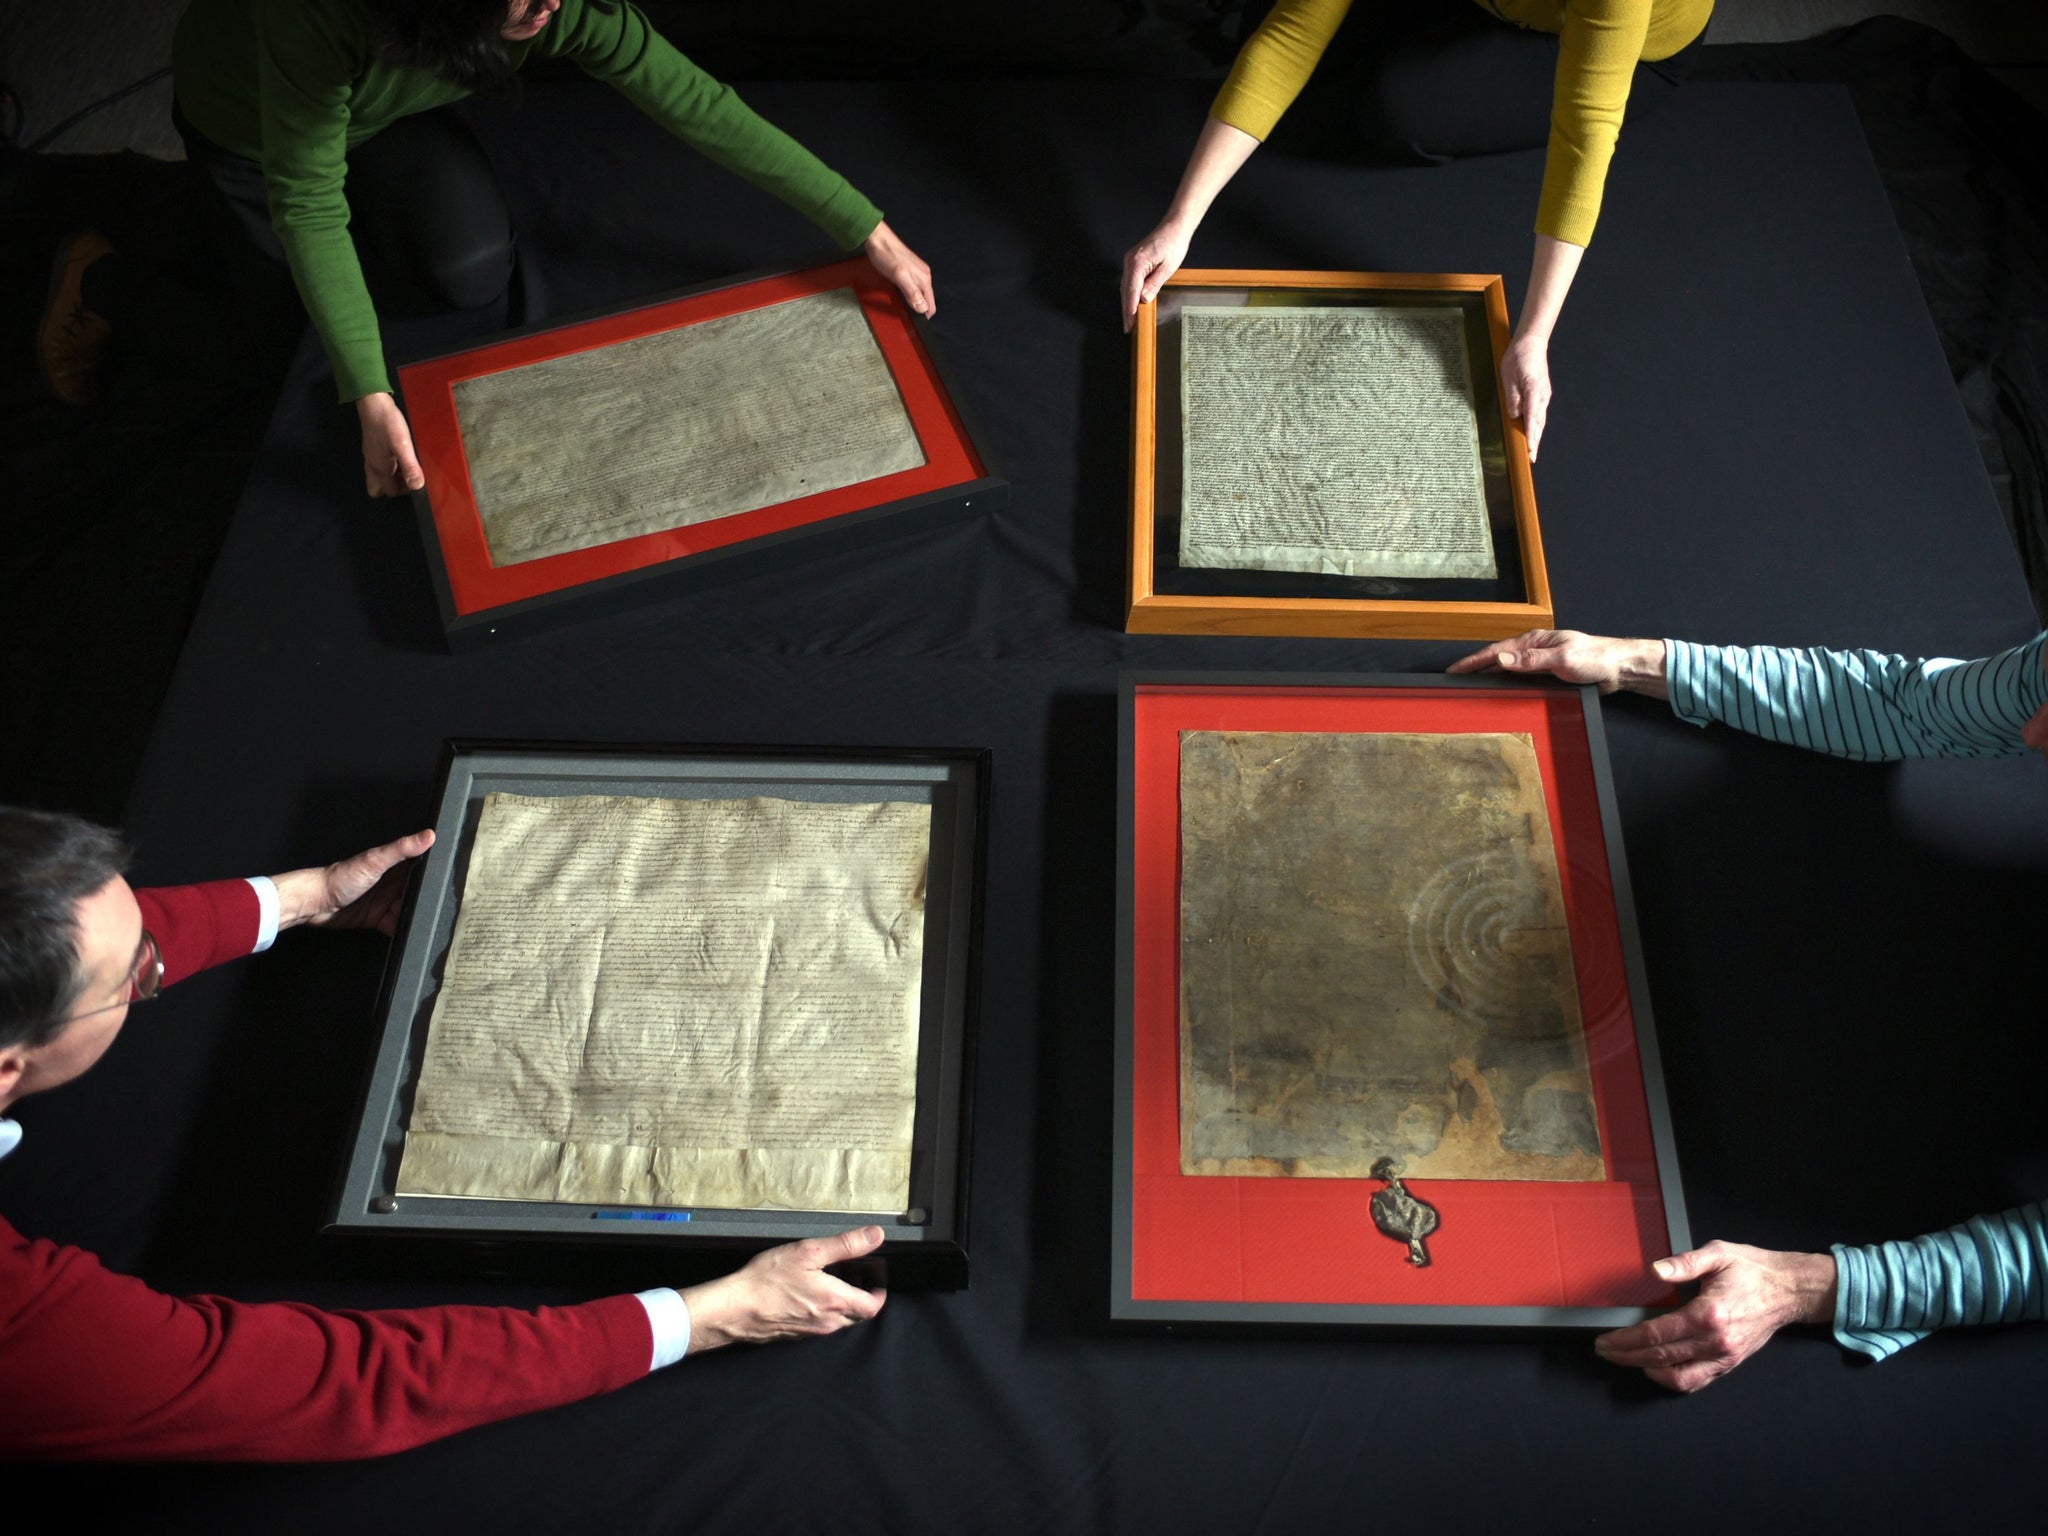 The four original surviving copies of the Magna Carta are brought together for the first time